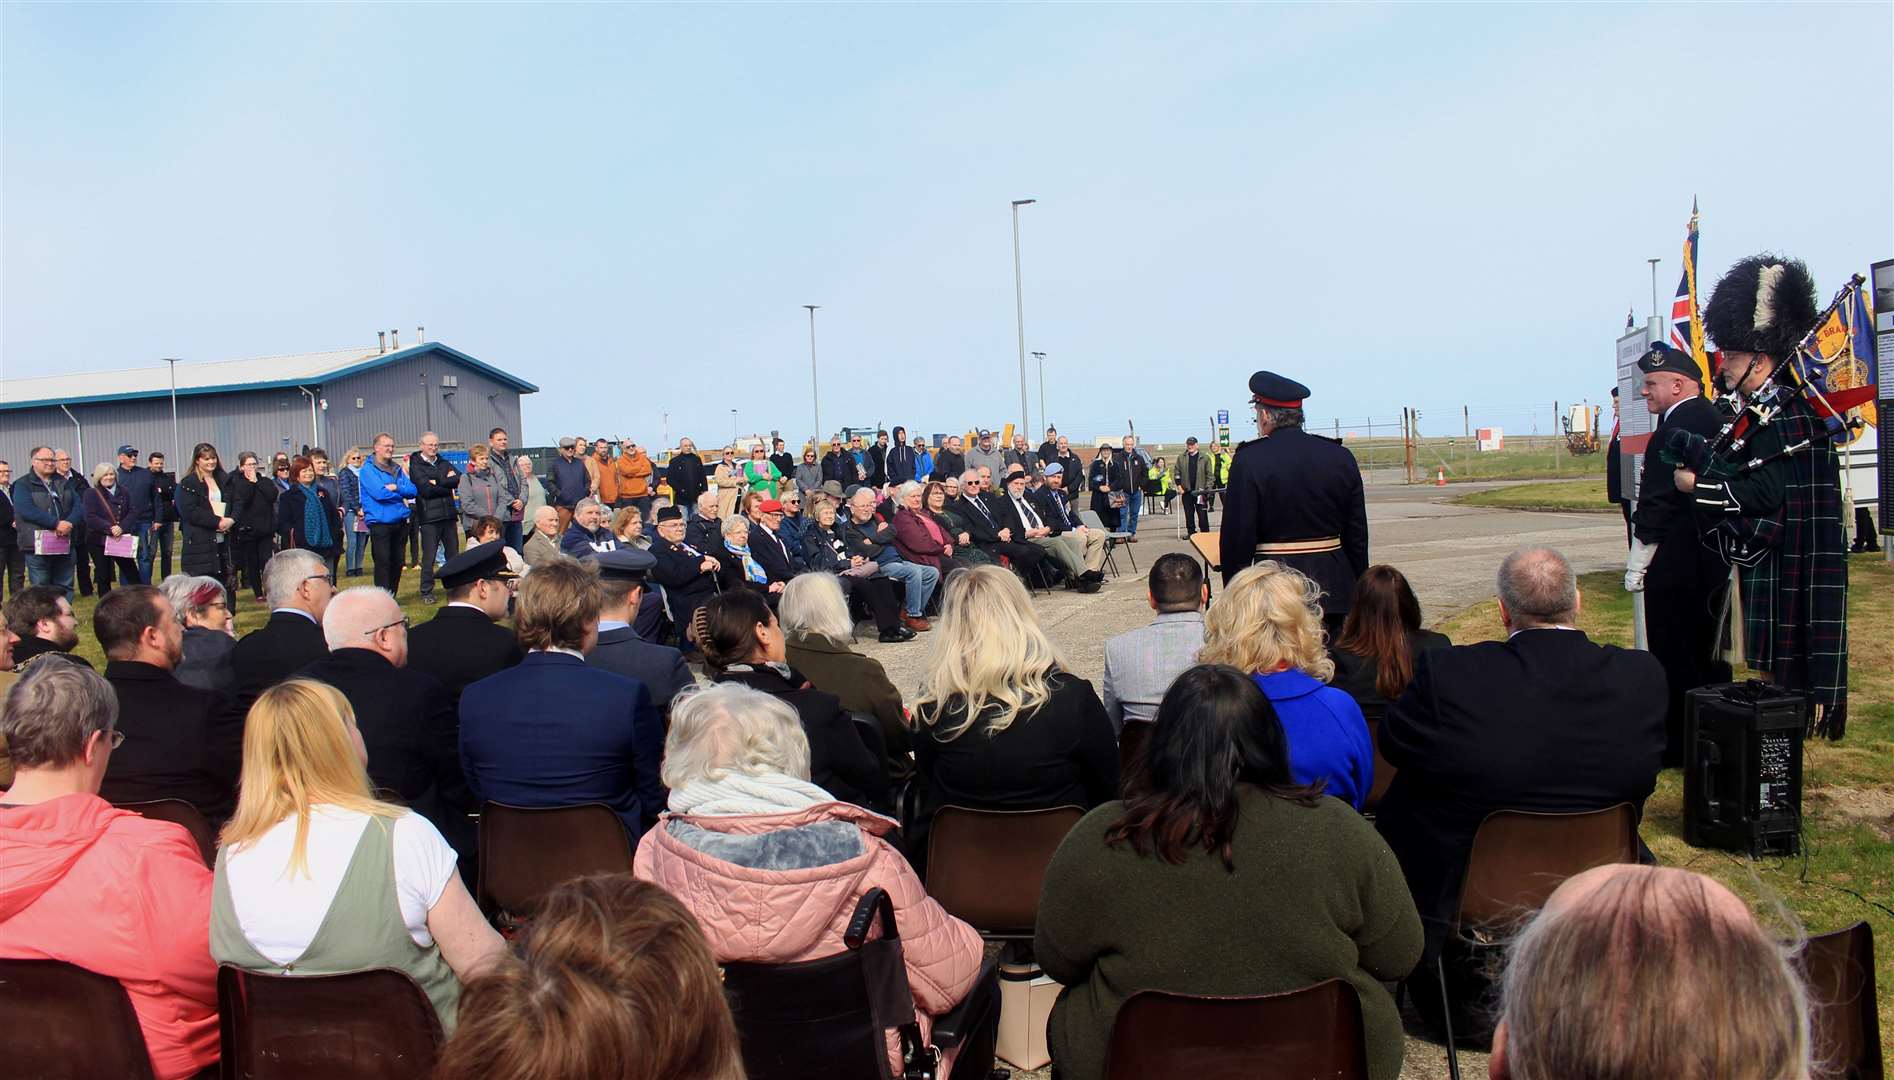 Lord Thurso, the Lord-Lieutenant of Caithness, giving his speech during Saturday's event. Picture: Alan Hendry